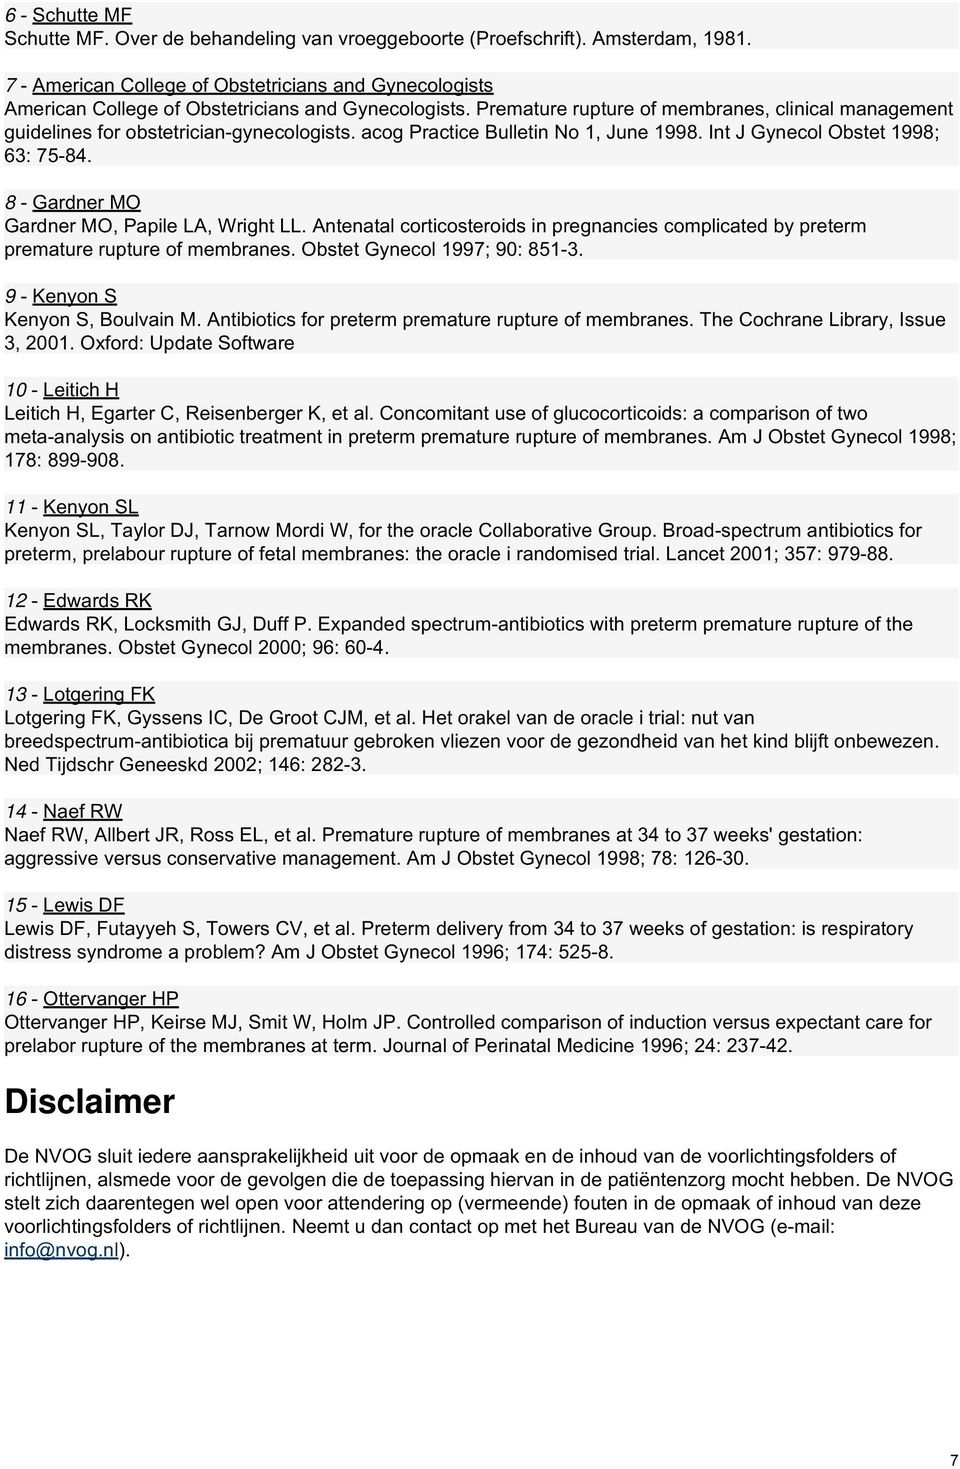 Premature rupture of membranes, clinical management guidelines for obstetrician-gynecologists. acog Practice Bulletin No 1, June 1998. Int J Gynecol Obstet 1998; 63: 75-84.